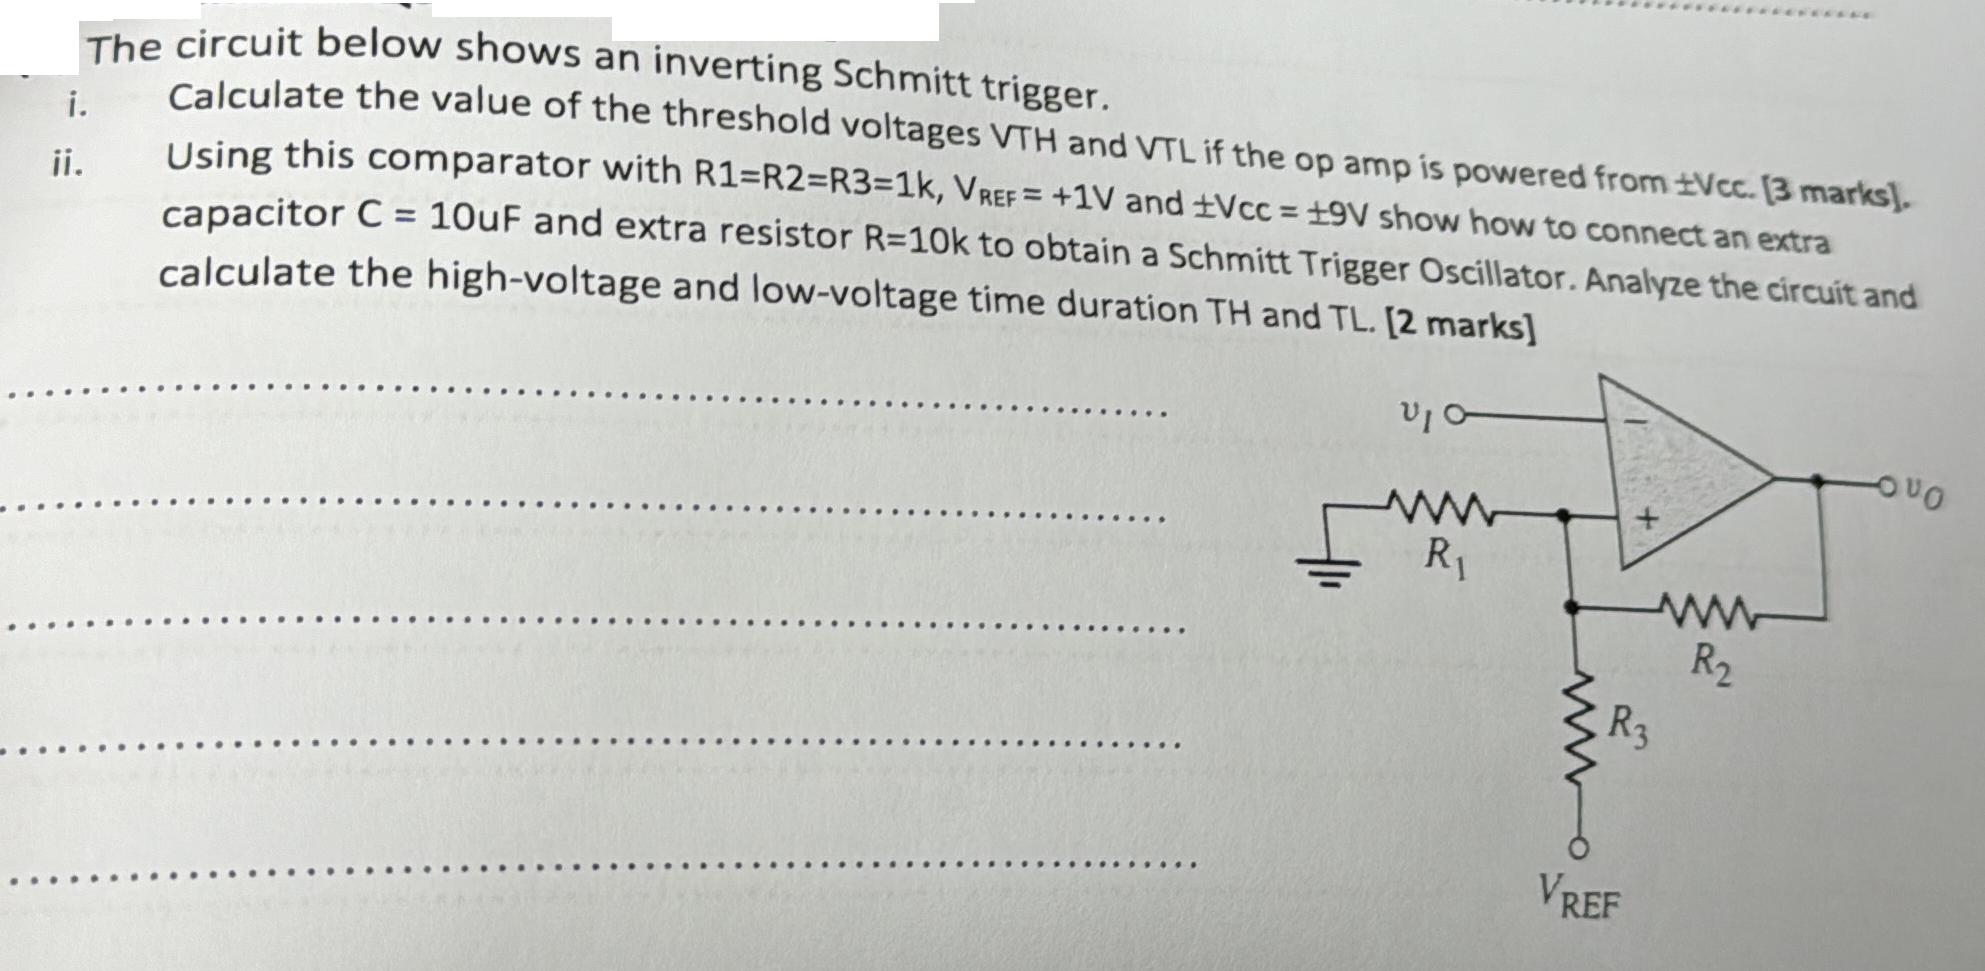 The circuit below shows an inverting Schmitt trigger. ii. i. Calculate the value of the threshold voltages